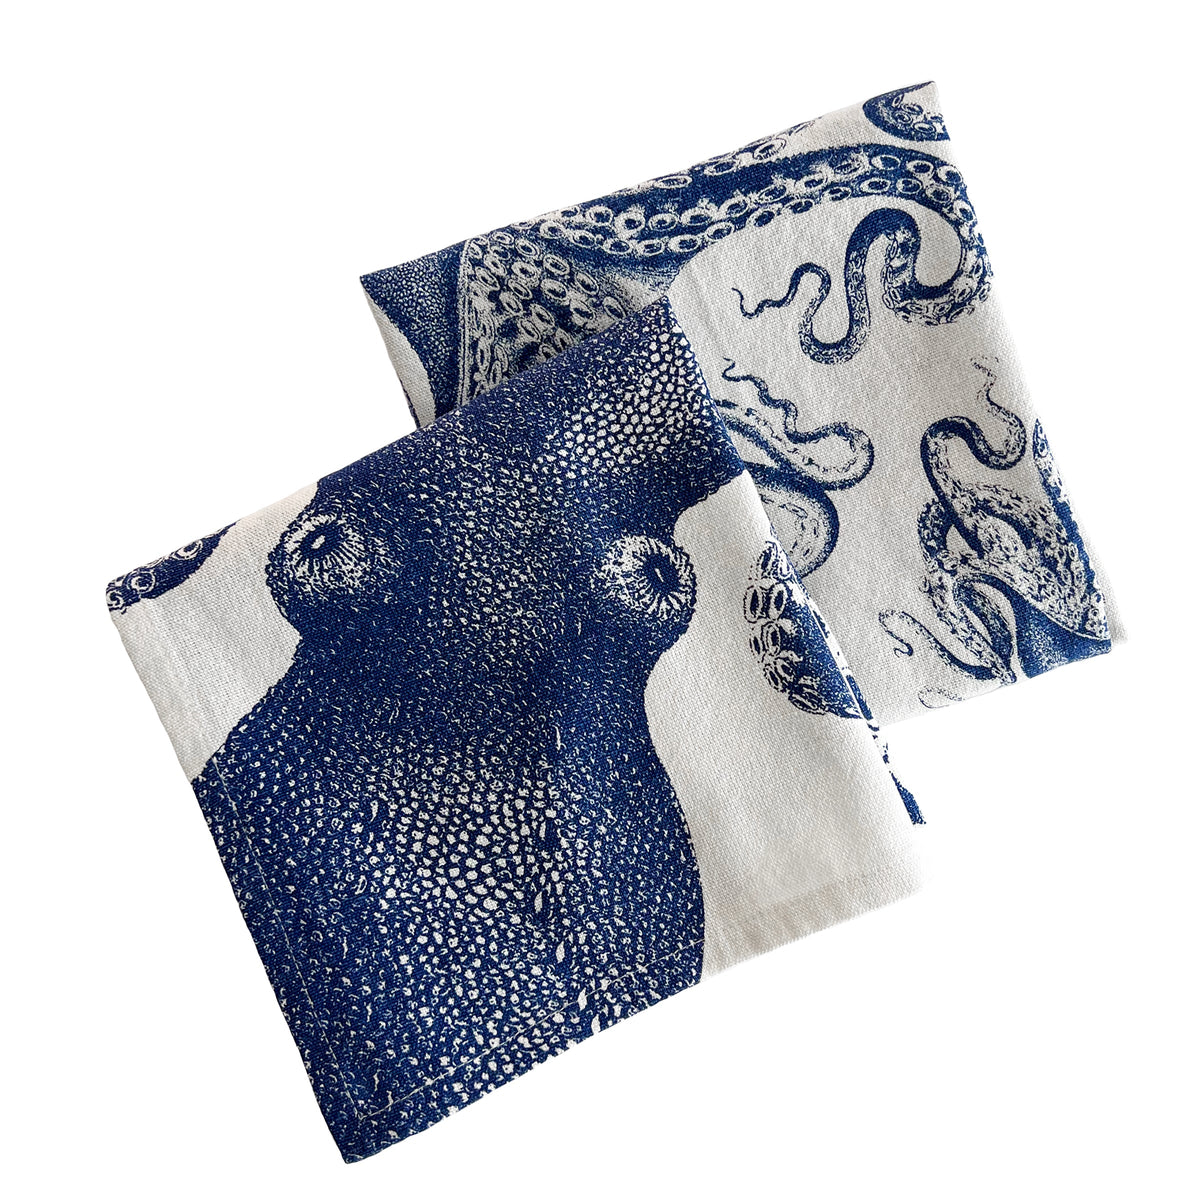 Two Lucy Kitchen Towels Set/2 featuring seafaring whimsy with blue and white octopus design by Caskata.